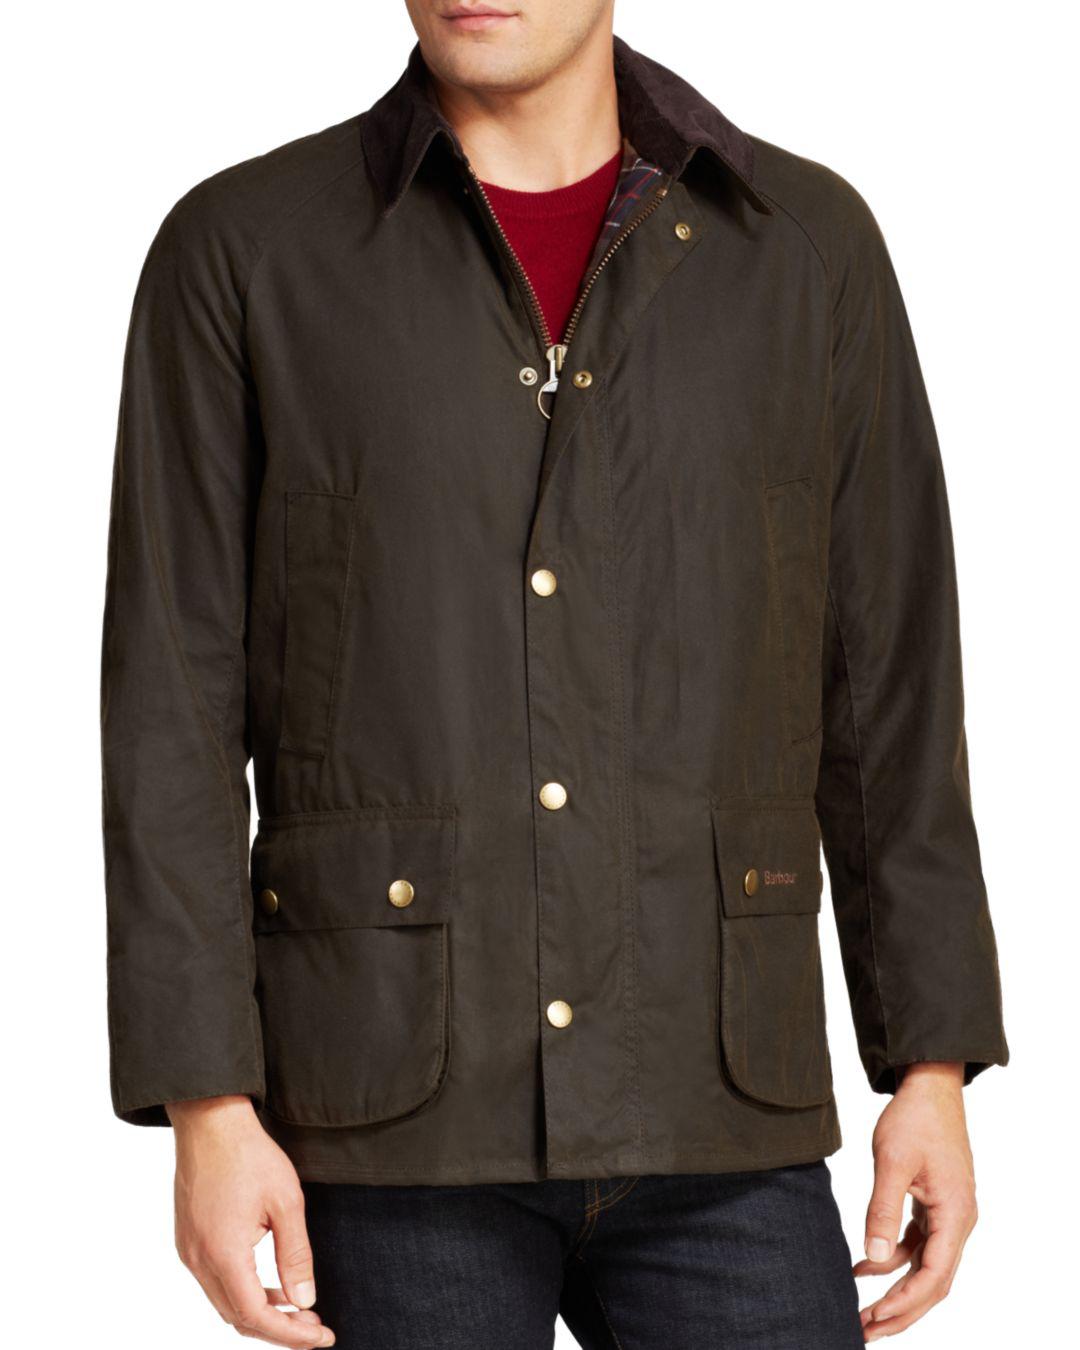 Barbour Ashby Tailored Waxed Cotton Coat in Olive (Green) for Men - Lyst